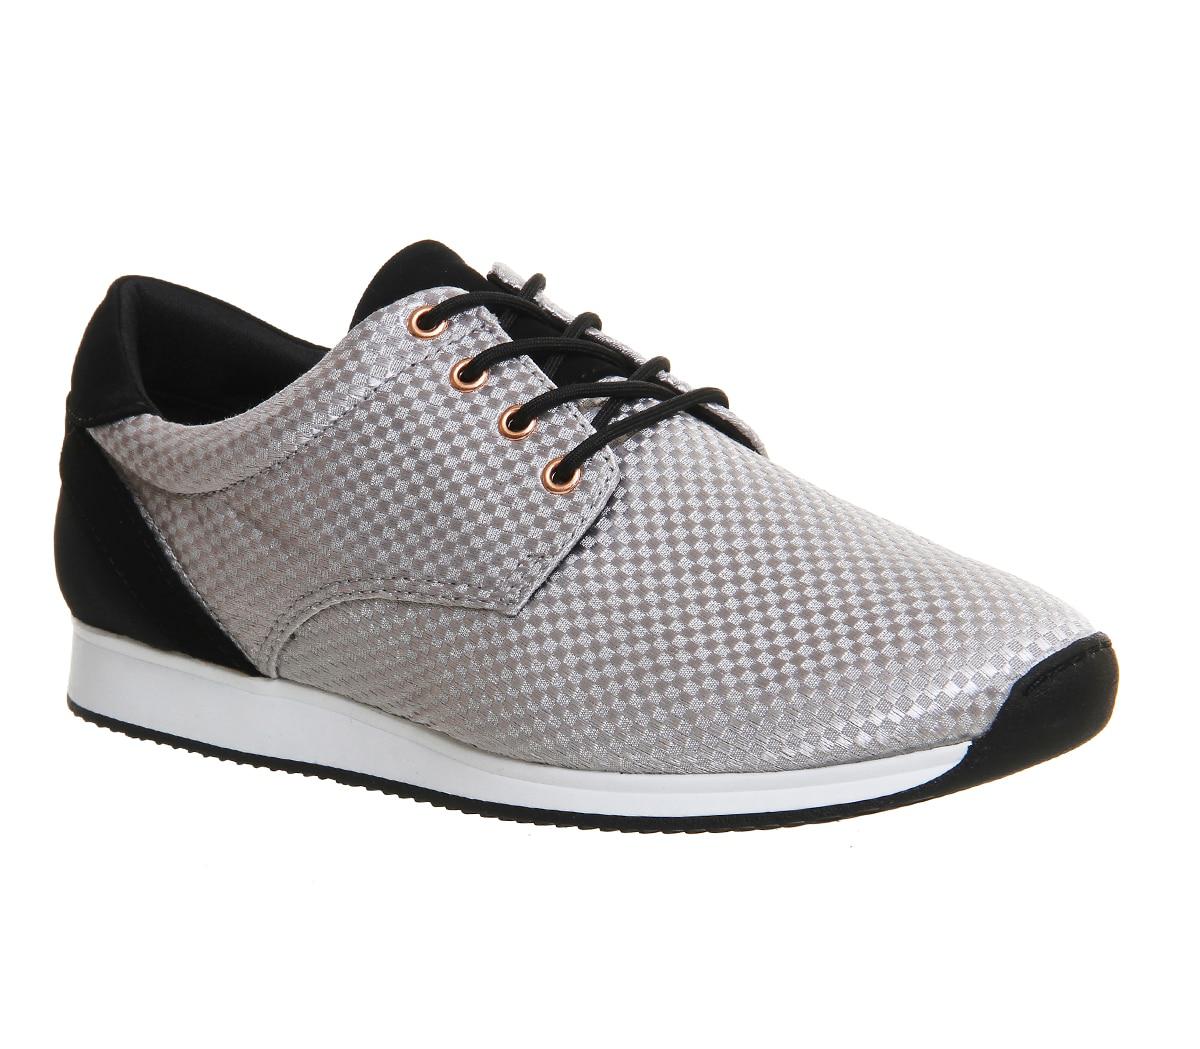 Vagabond Leather Kasai Sneaker in Silver (Black) for Men - Lyst